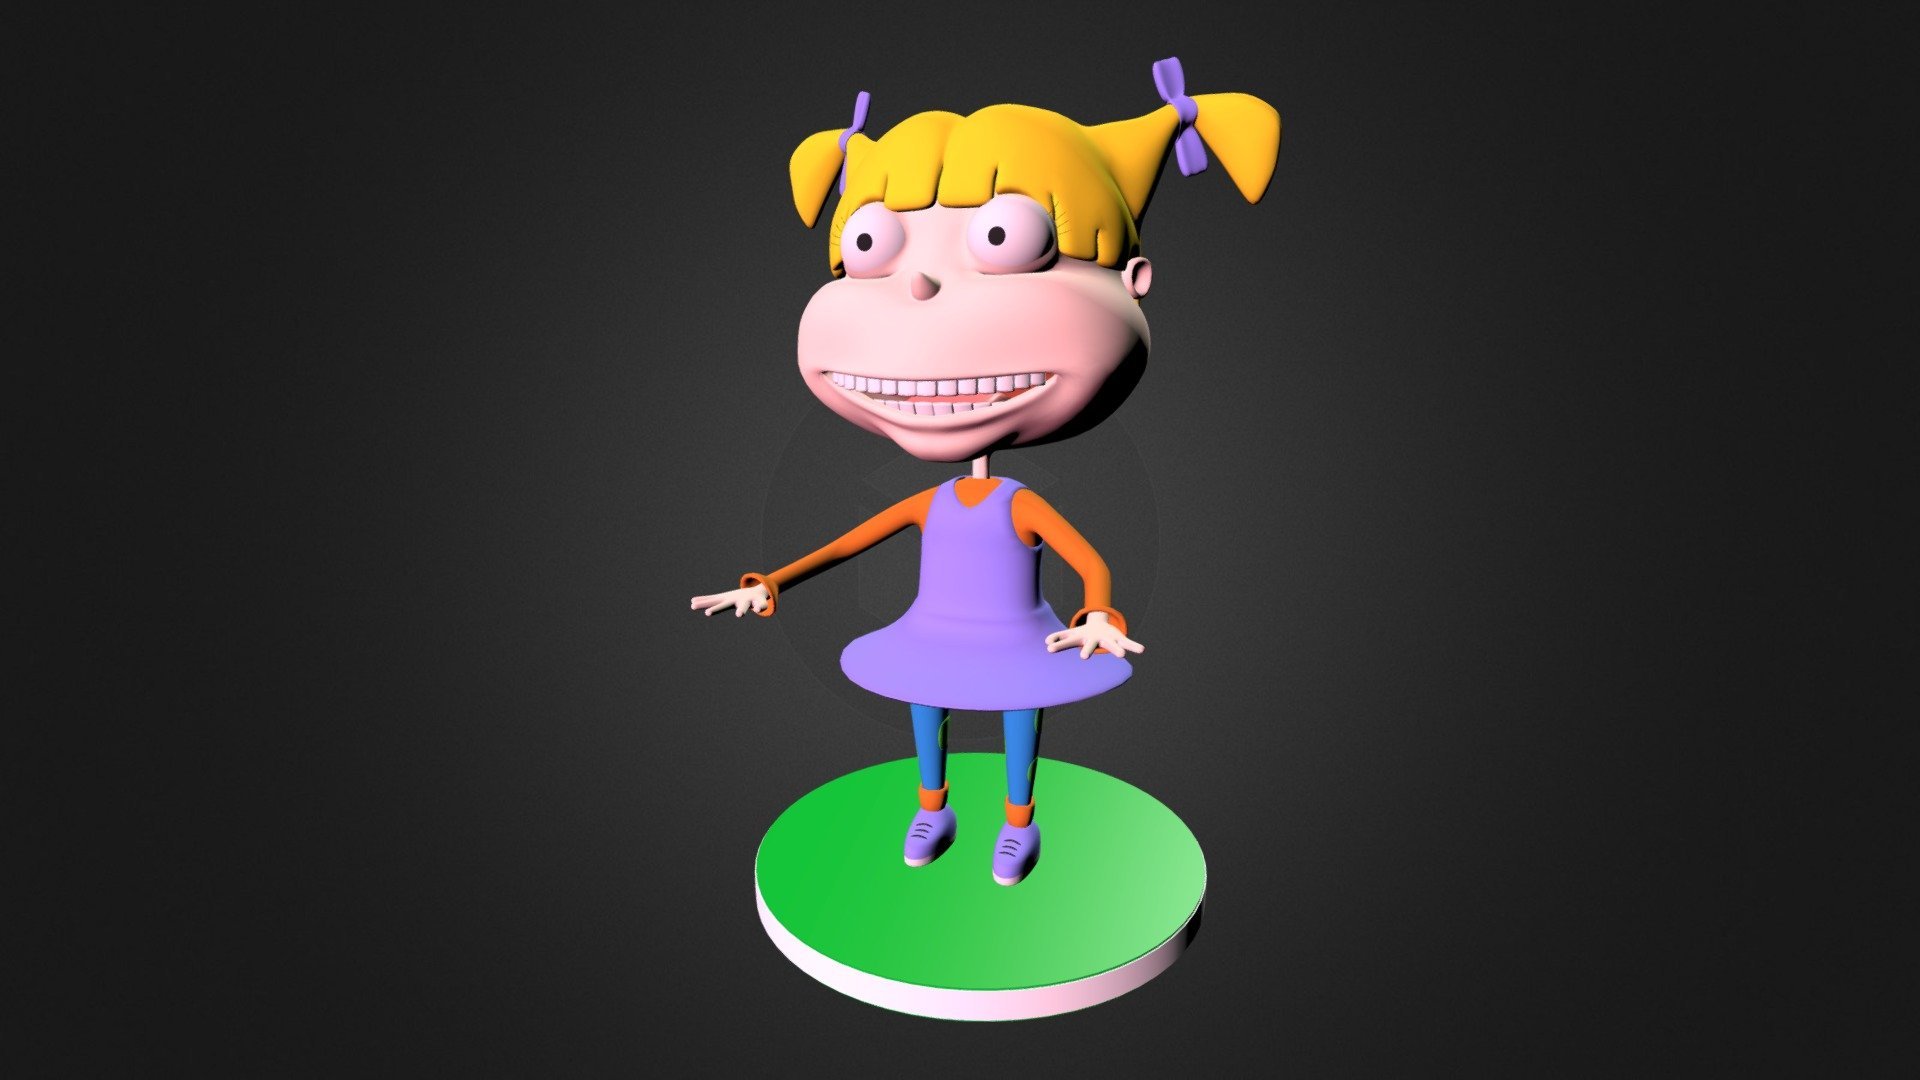 Rugrats (Angelica Pickles) model by Brandon Farley [9c6ad52]